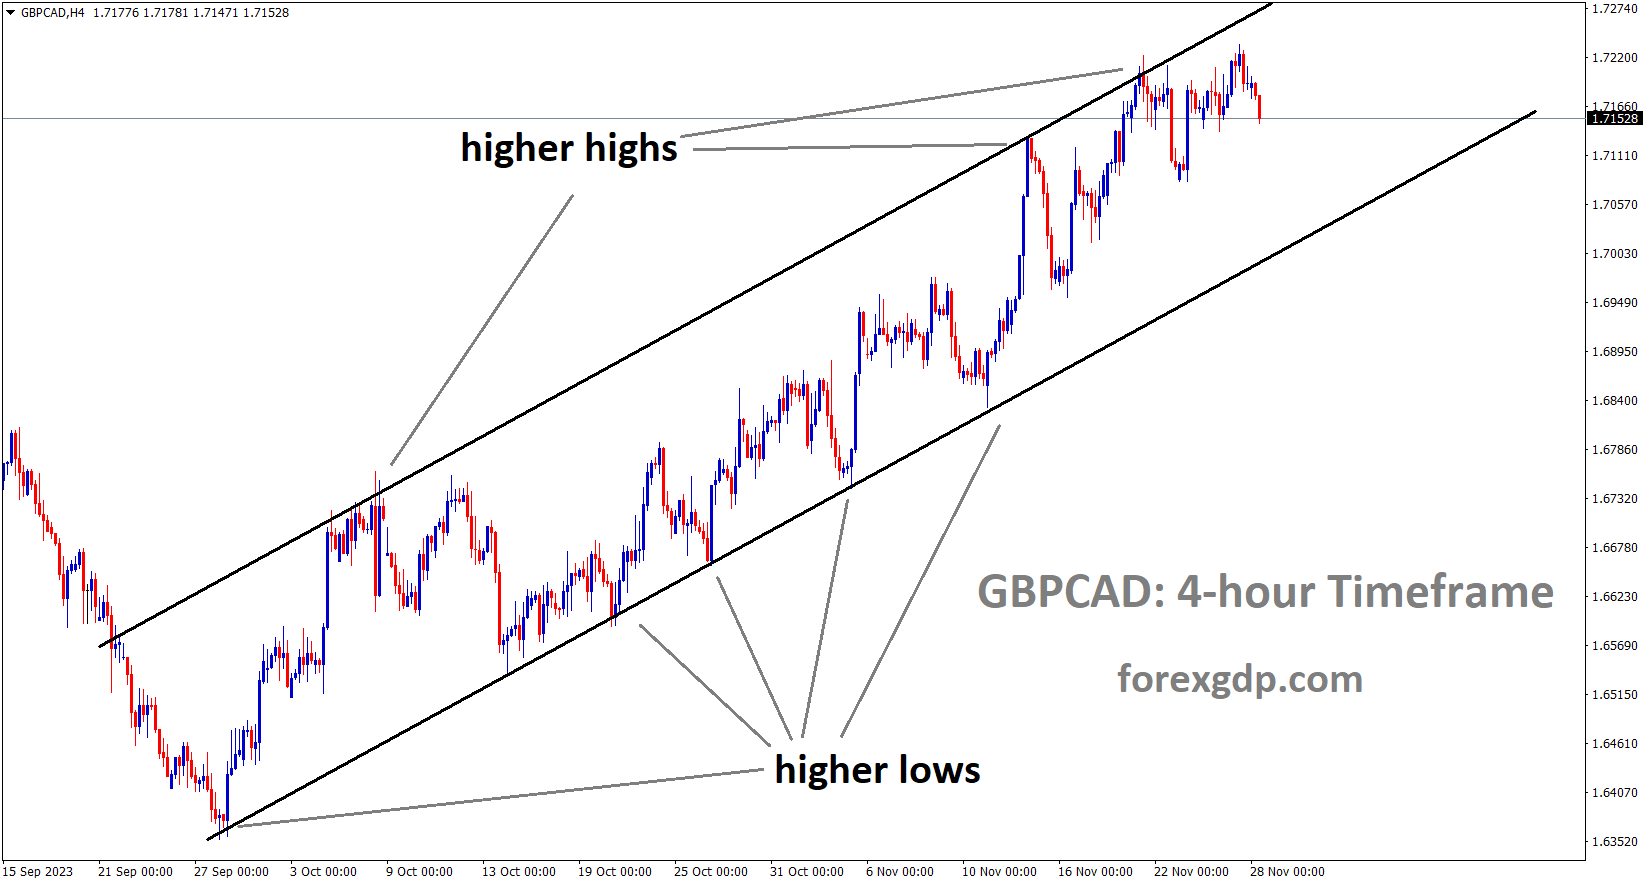 GBPCAD is moving in an Ascending channel and the market has fallen from the higher high area of the channel